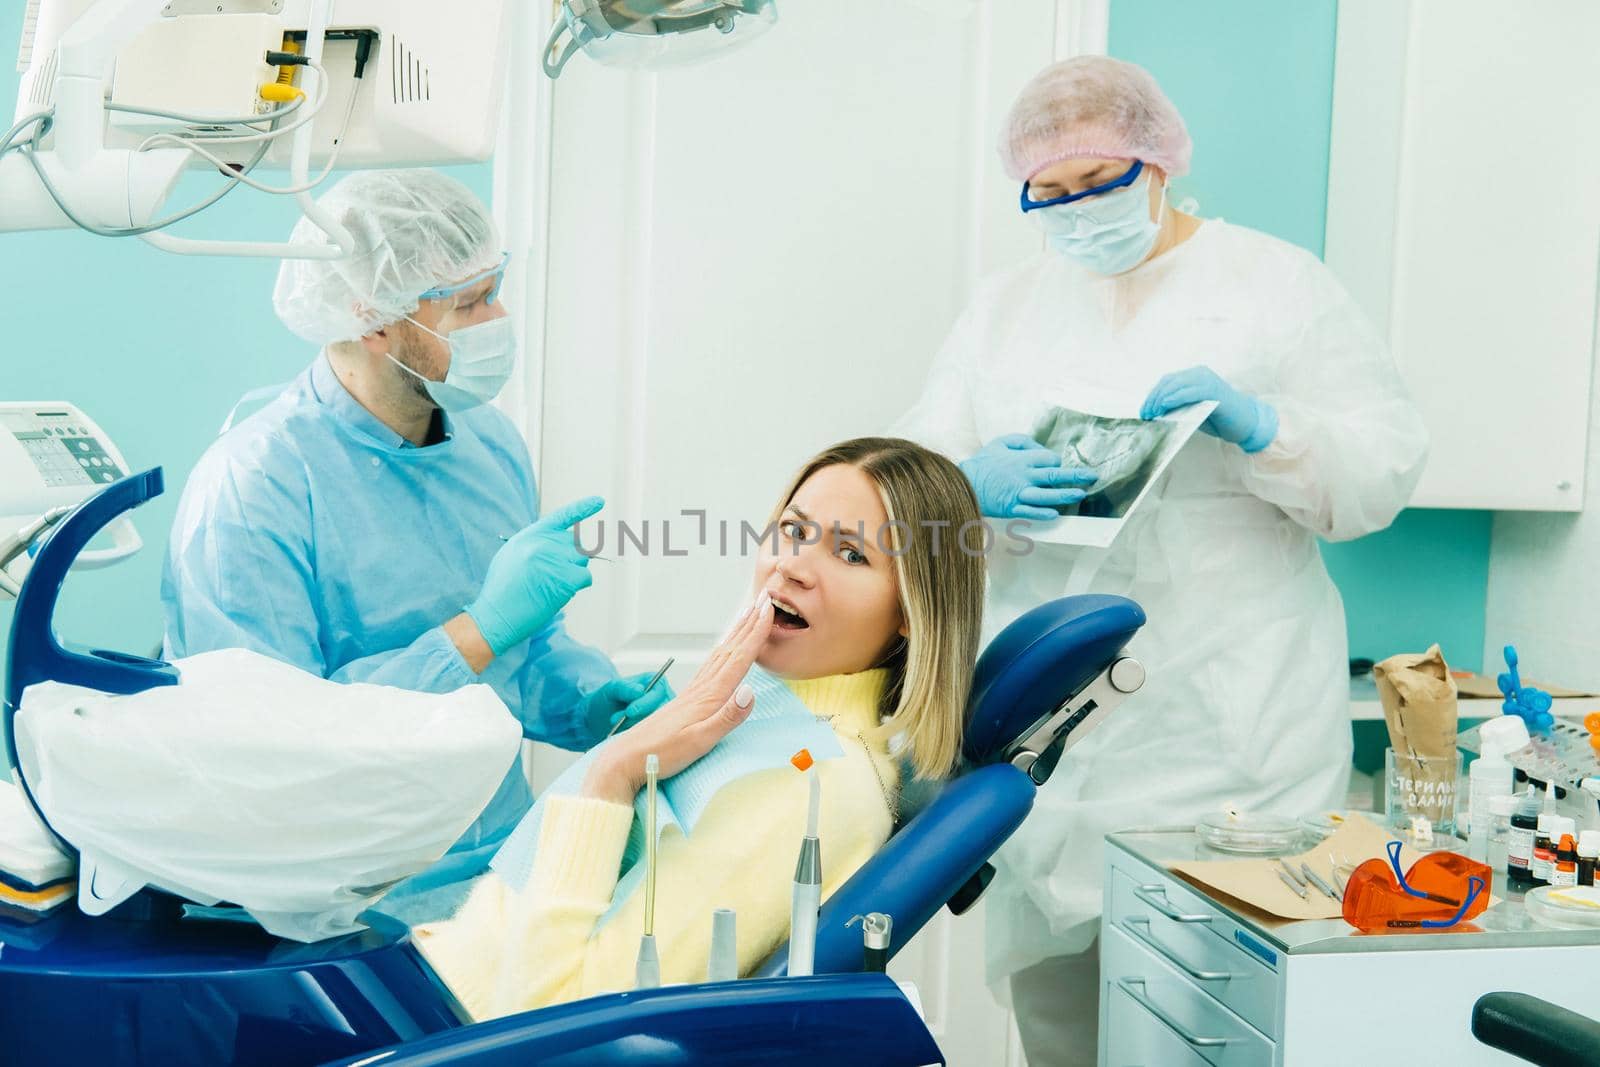 The dentist explains the details of the X-ray to his colleague, the patient is surprised by what is happening by Lobachad